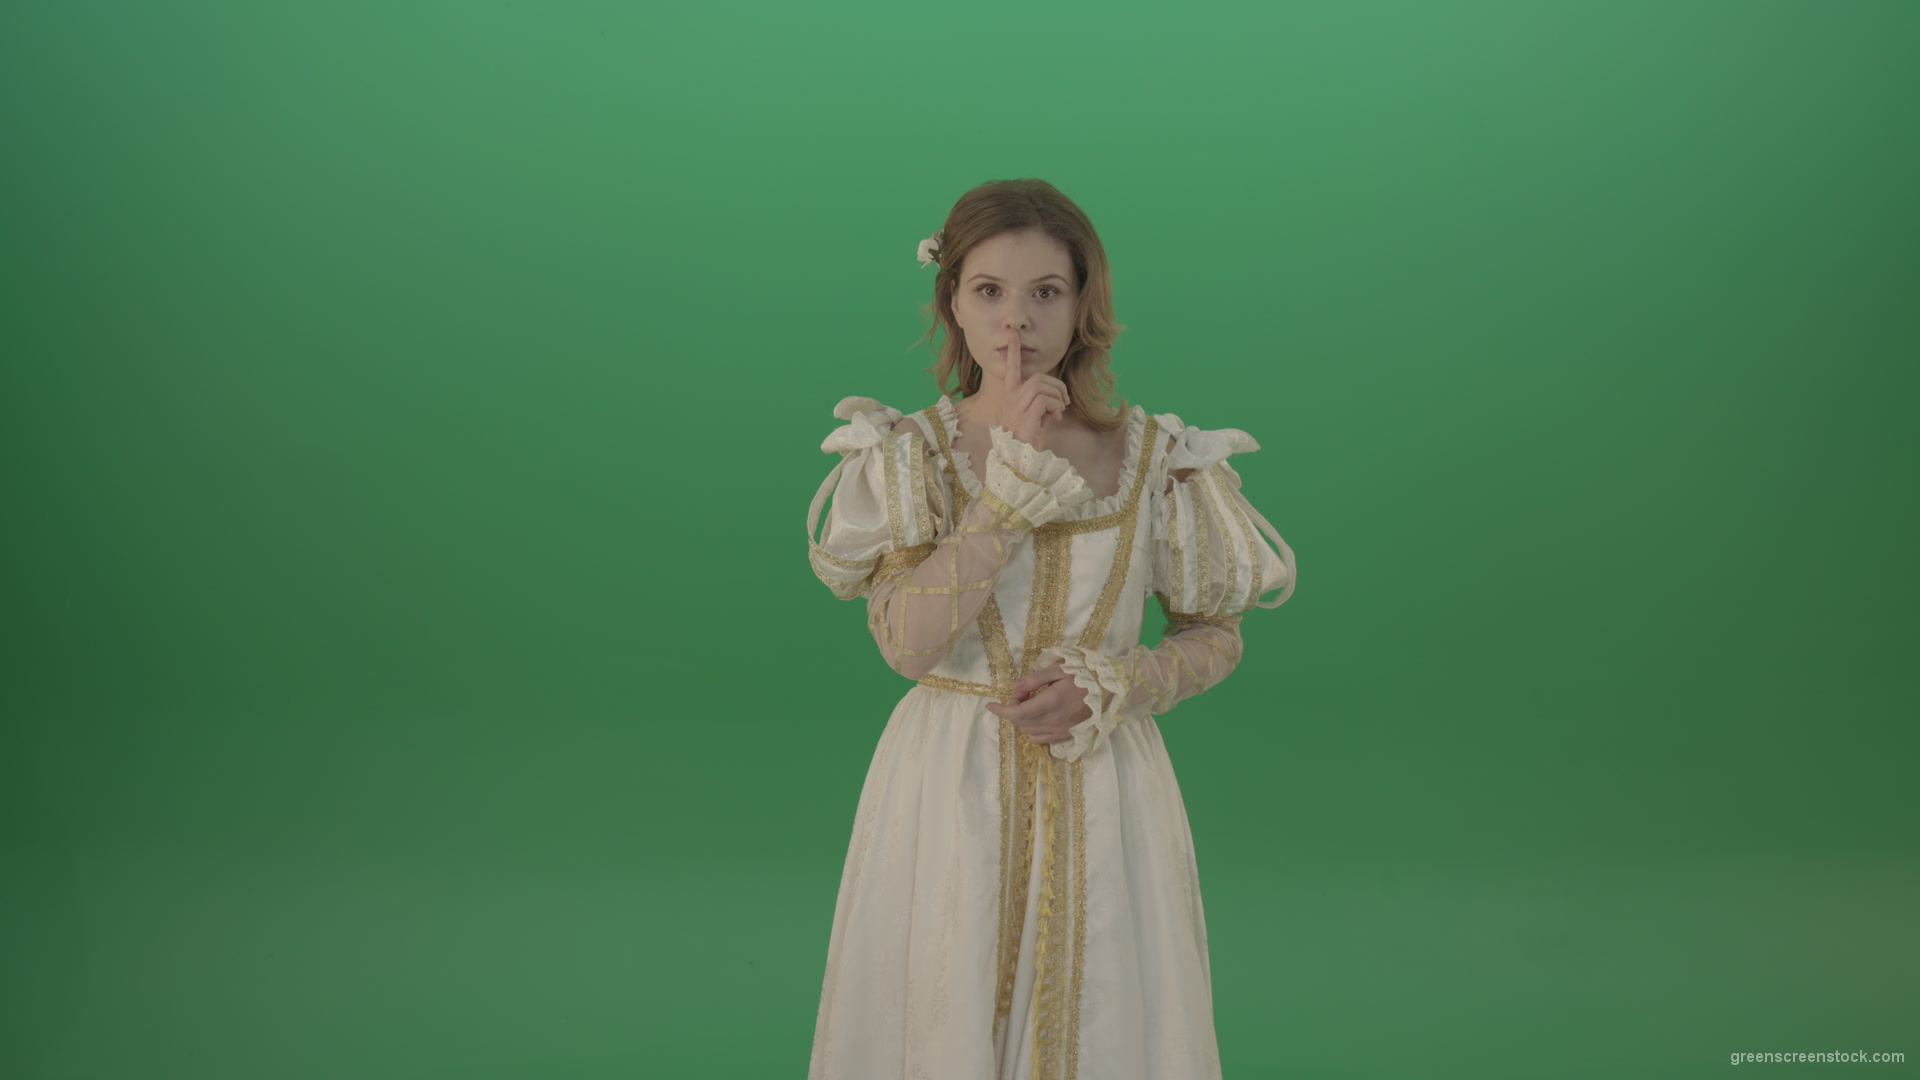 Girl-asks-to-be-quieter-in-a-white-dress-isolated-on-green-screen_008 Green Screen Stock